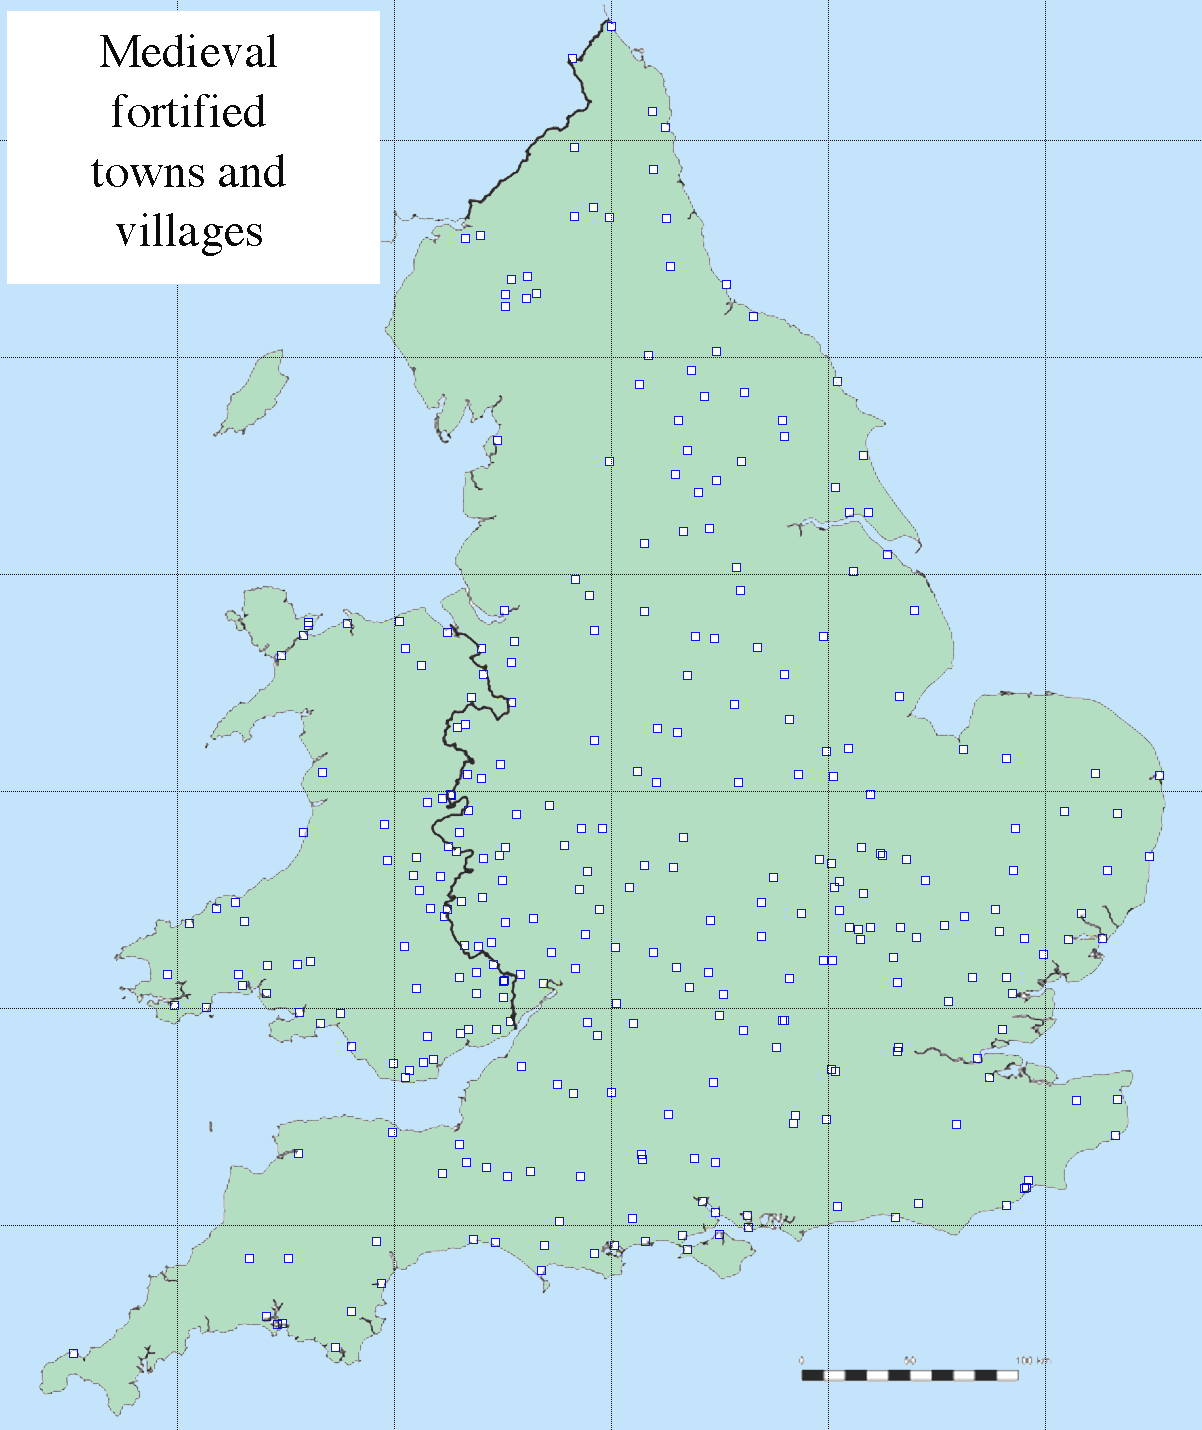 Distribution map of medieval urban fortifications